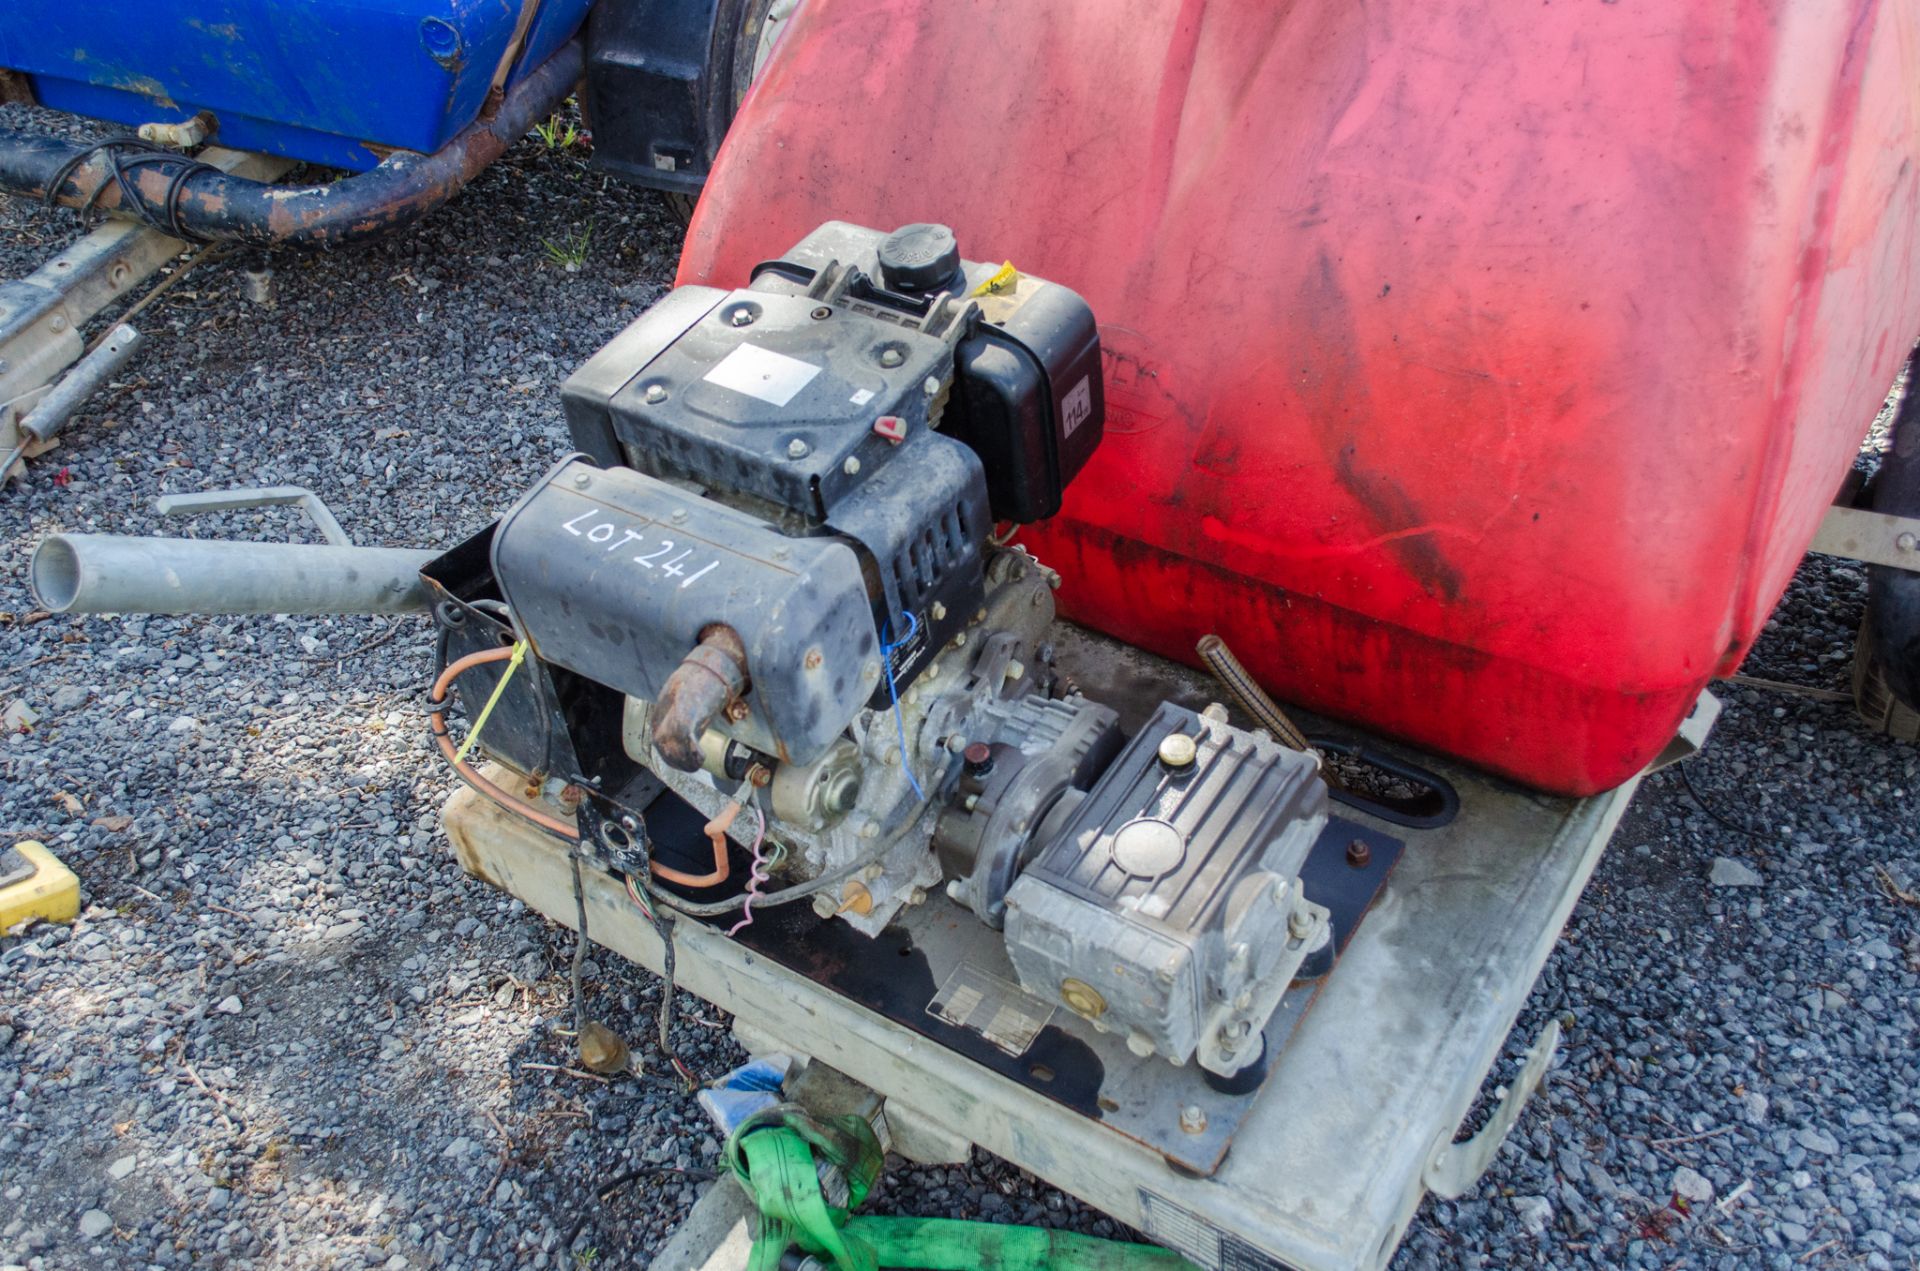 Western diesel driven fast tow pressure washer bowser ** Draw bar, engine parts & lance missing ** - Image 4 of 4